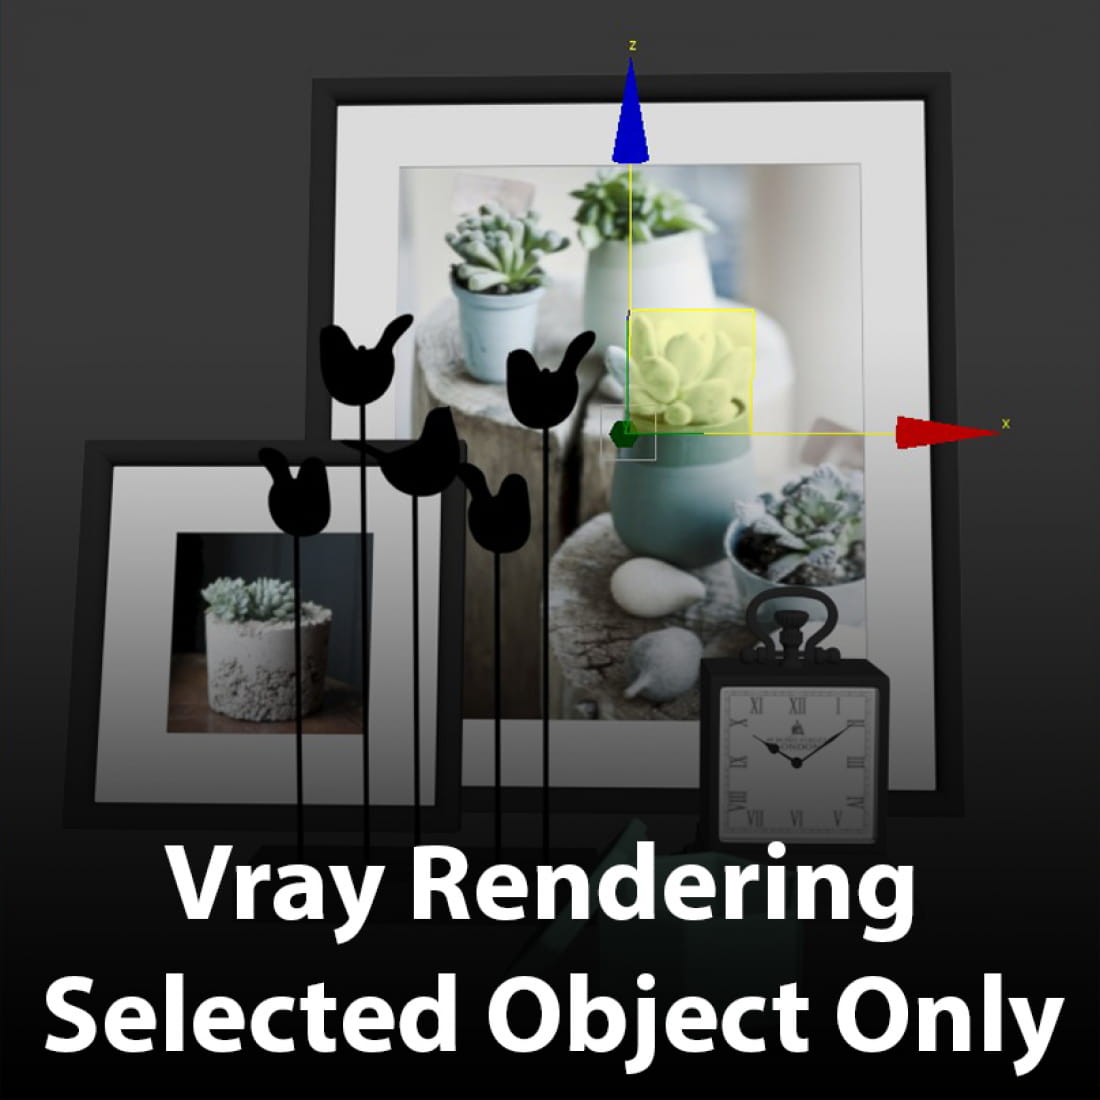 vray-rendering-selected-object-only